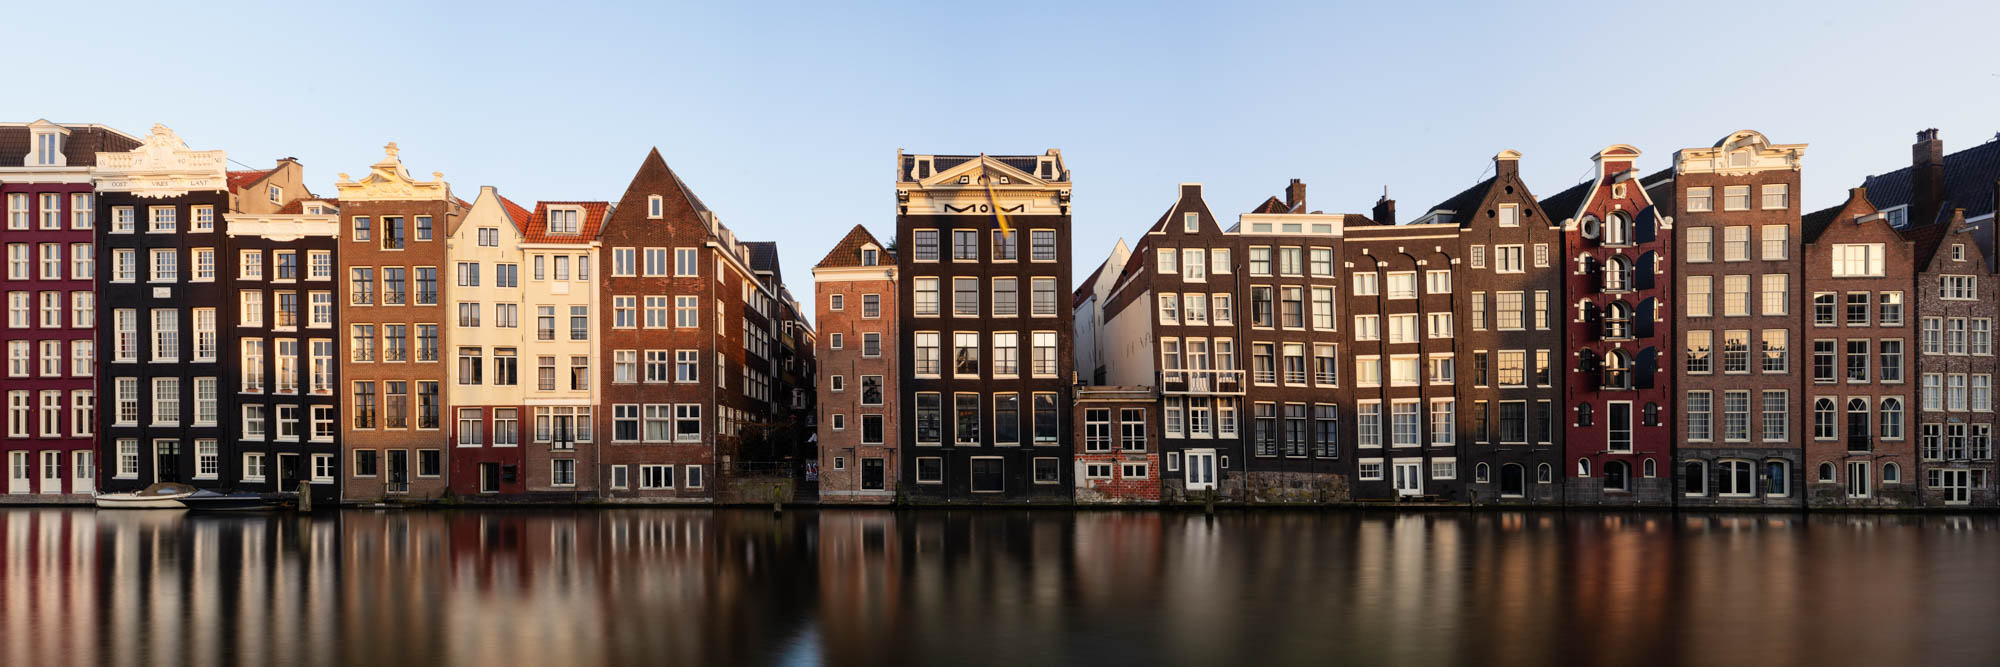 Panorama of Amsterdam Canal Houses